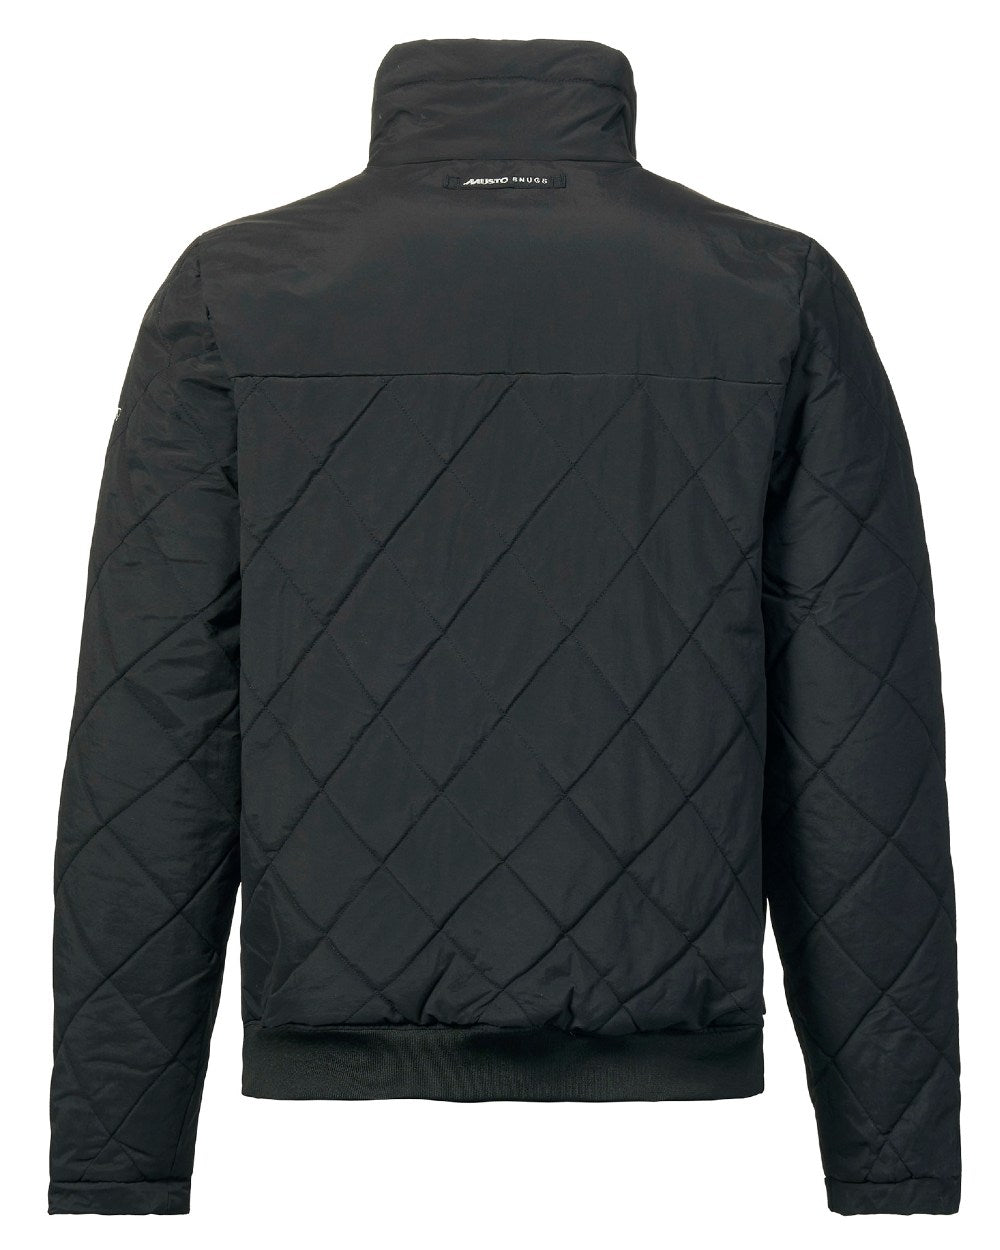 Black Coloured Musto Mens Snug Diamond Quilted Jacket On A White Background 